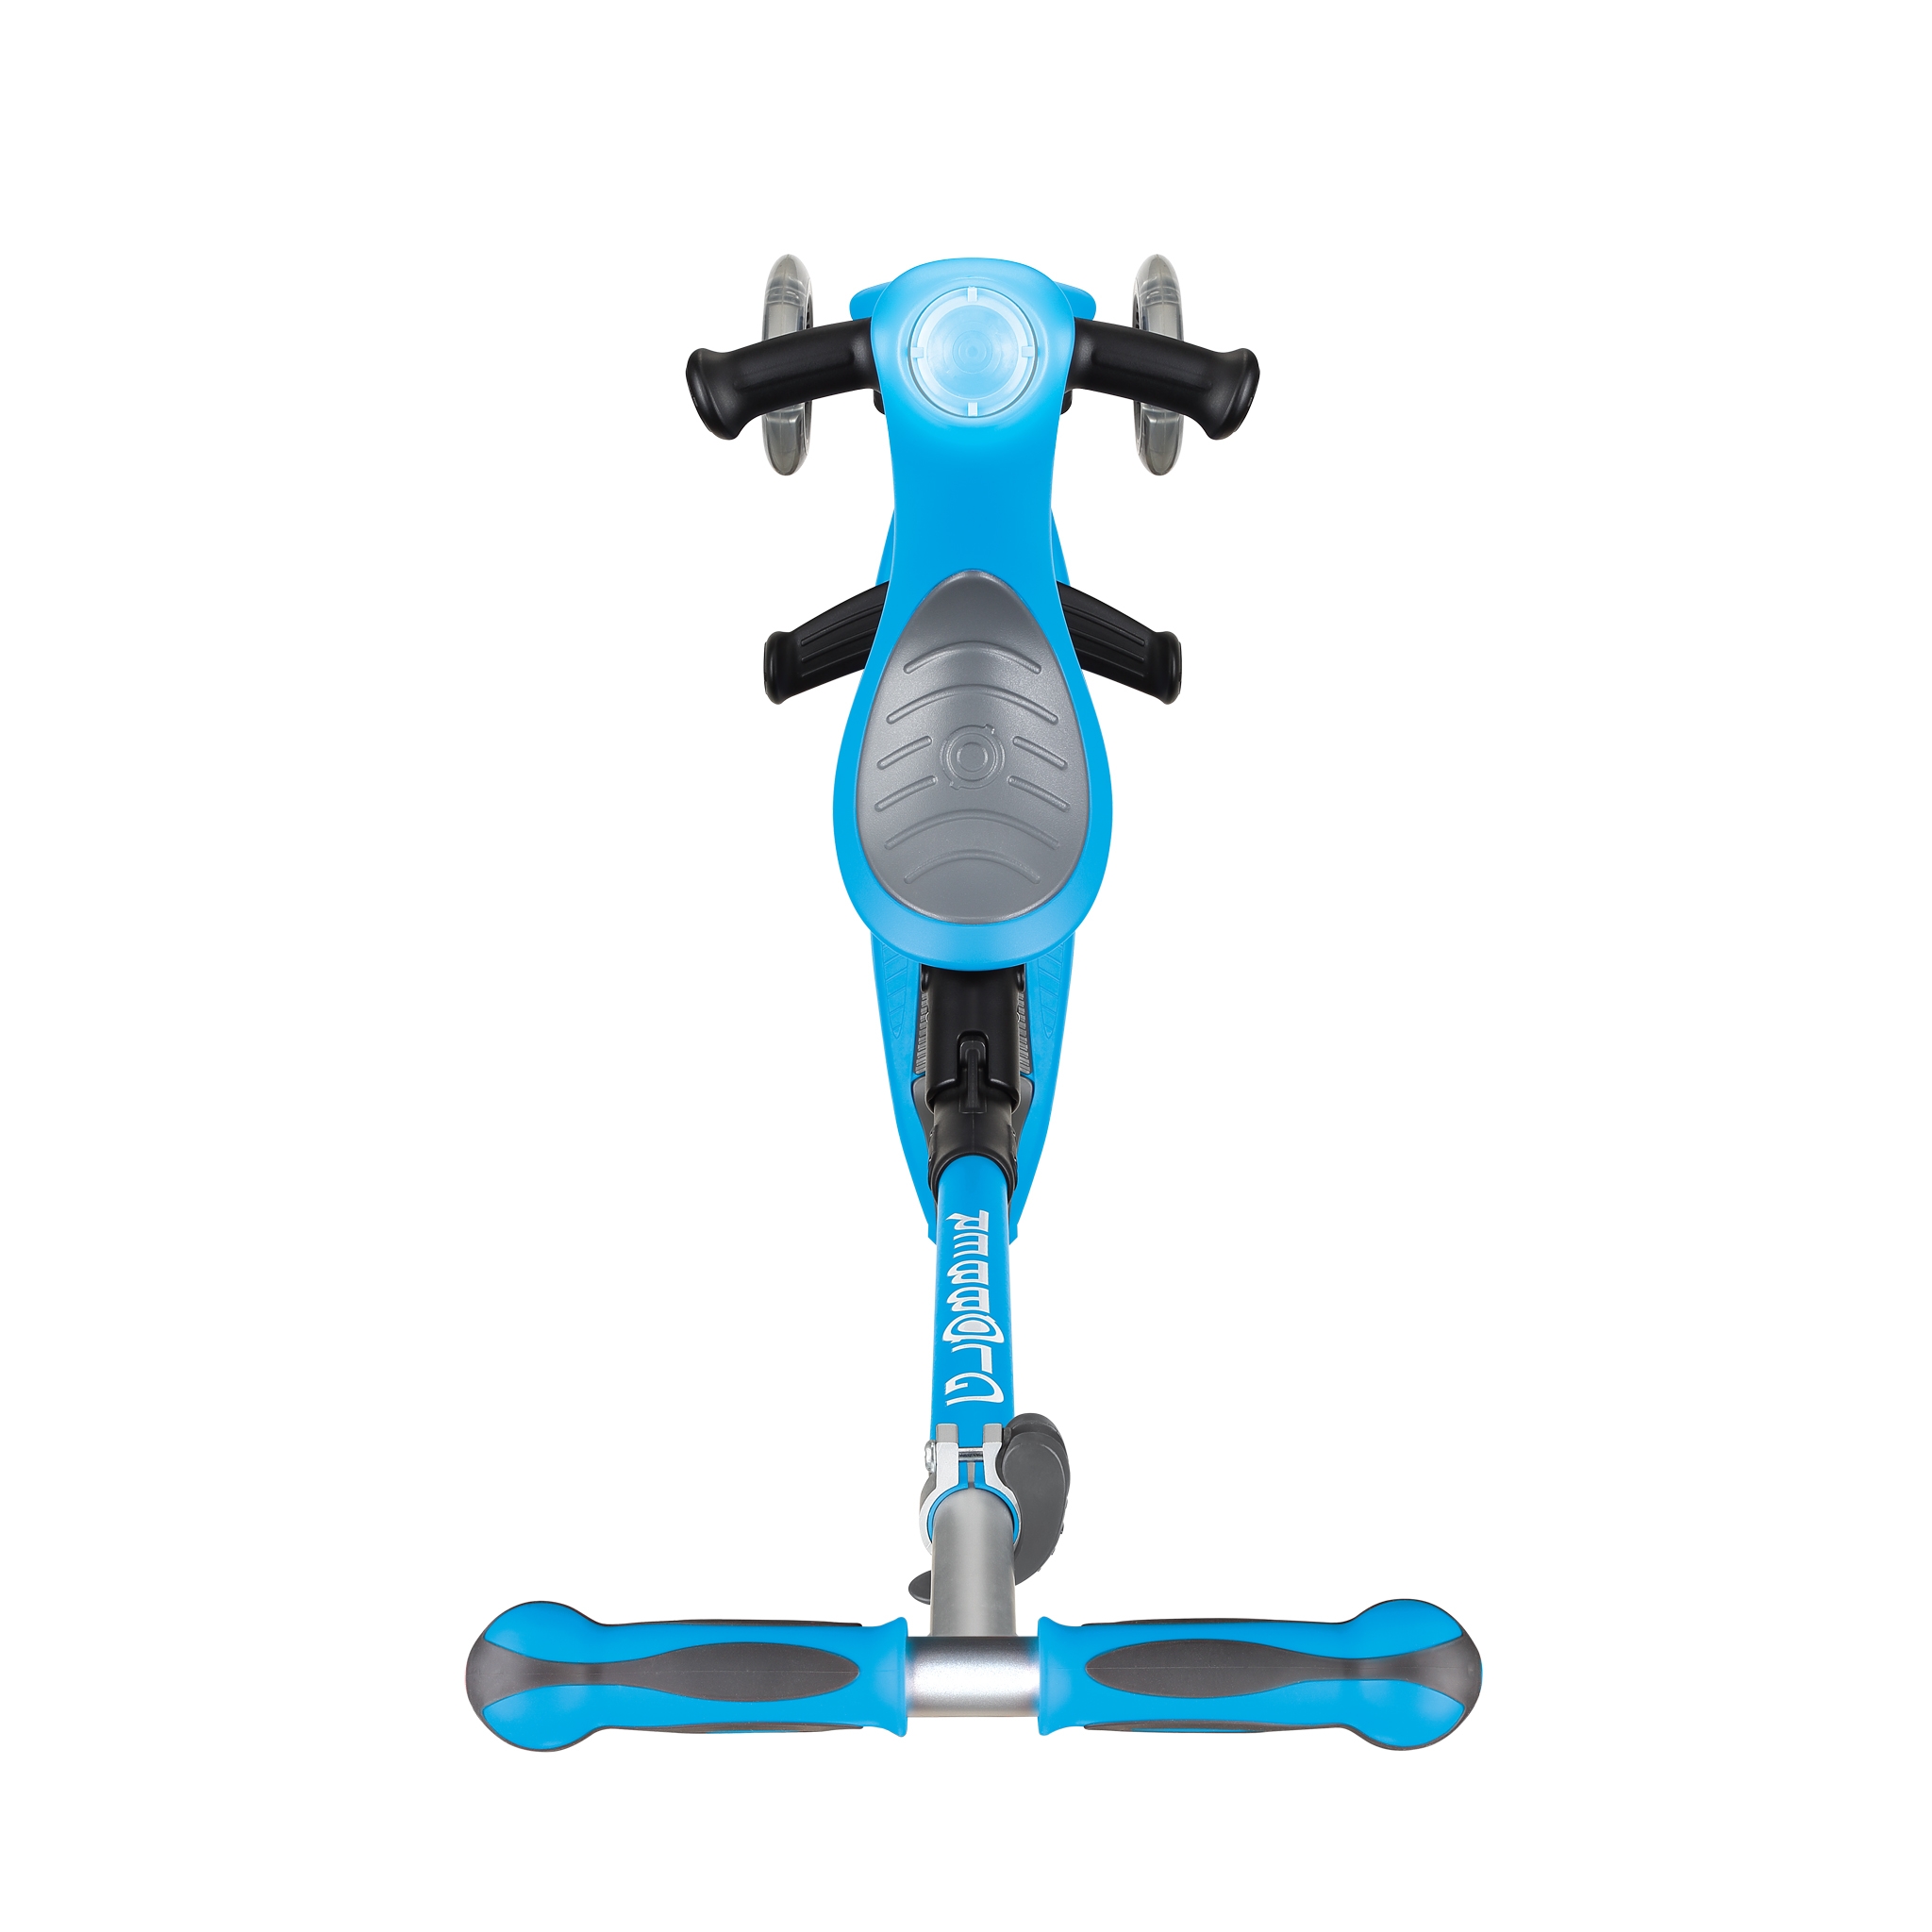 GO-UP-DELUXE-PLAY-ride-on-walking-bike-scooter-with-light-and-sound-module-and-extra-wide-3-height-adjustable-seat-sky-blue 2